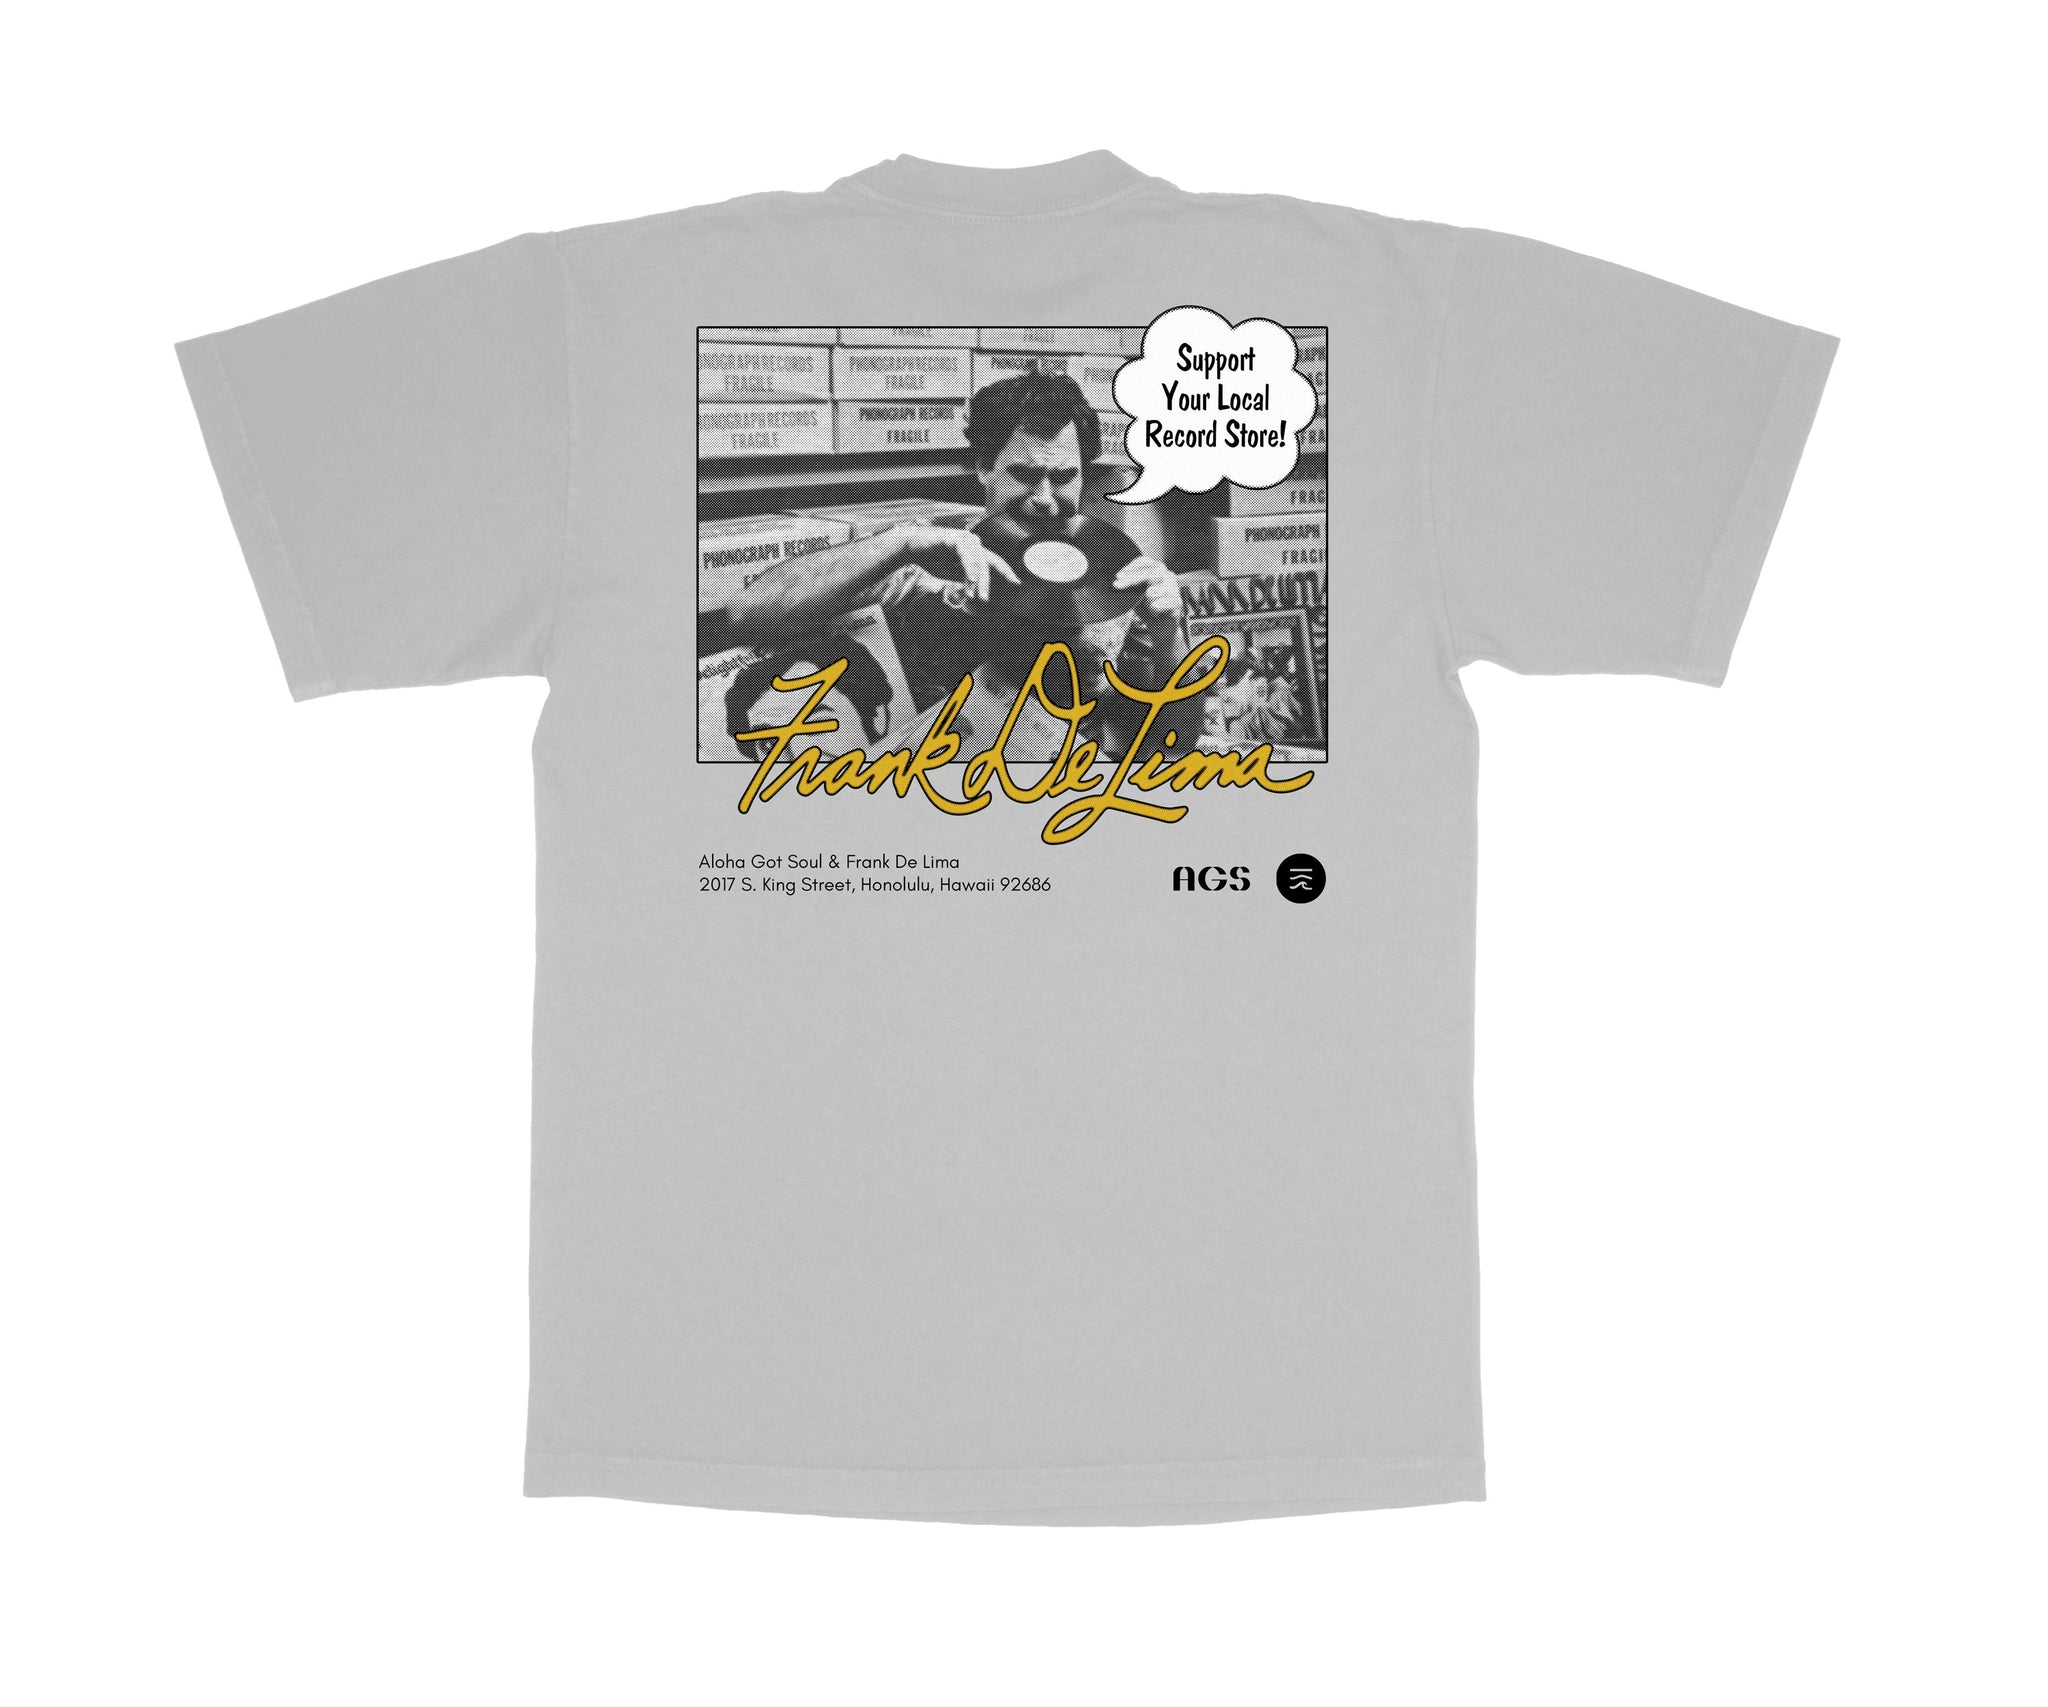 Frank De Lima “Support Your Local Record Store!” T-Shirt